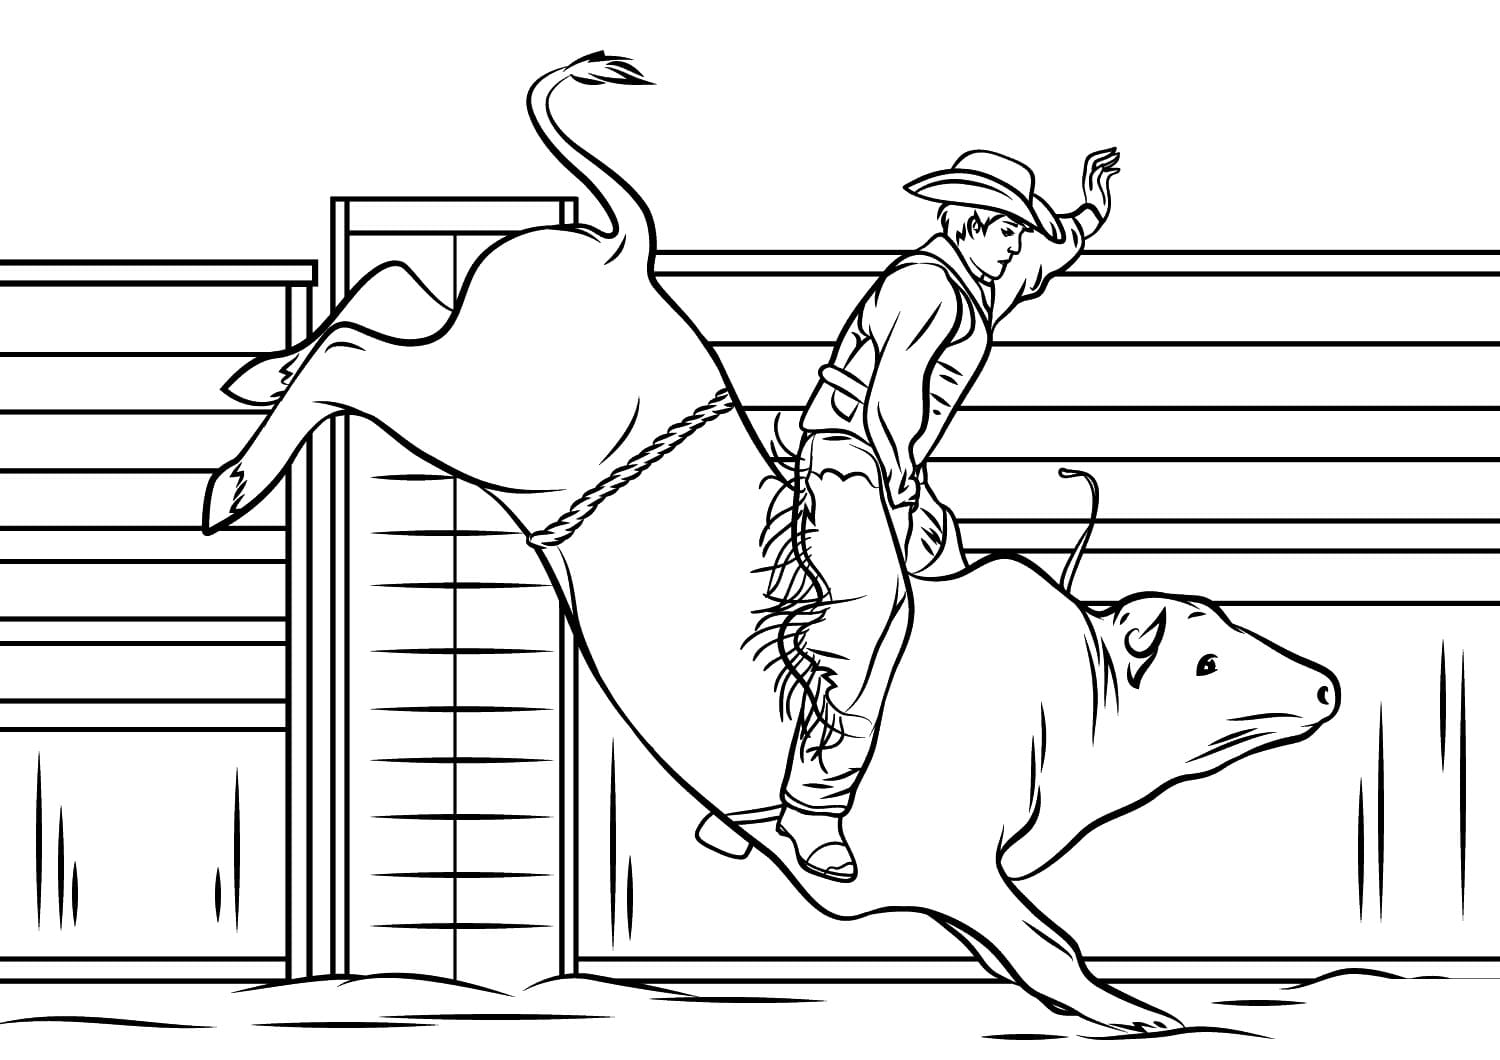 Rodeo Cowboy coloring page - Download, Print or Color Online for Free